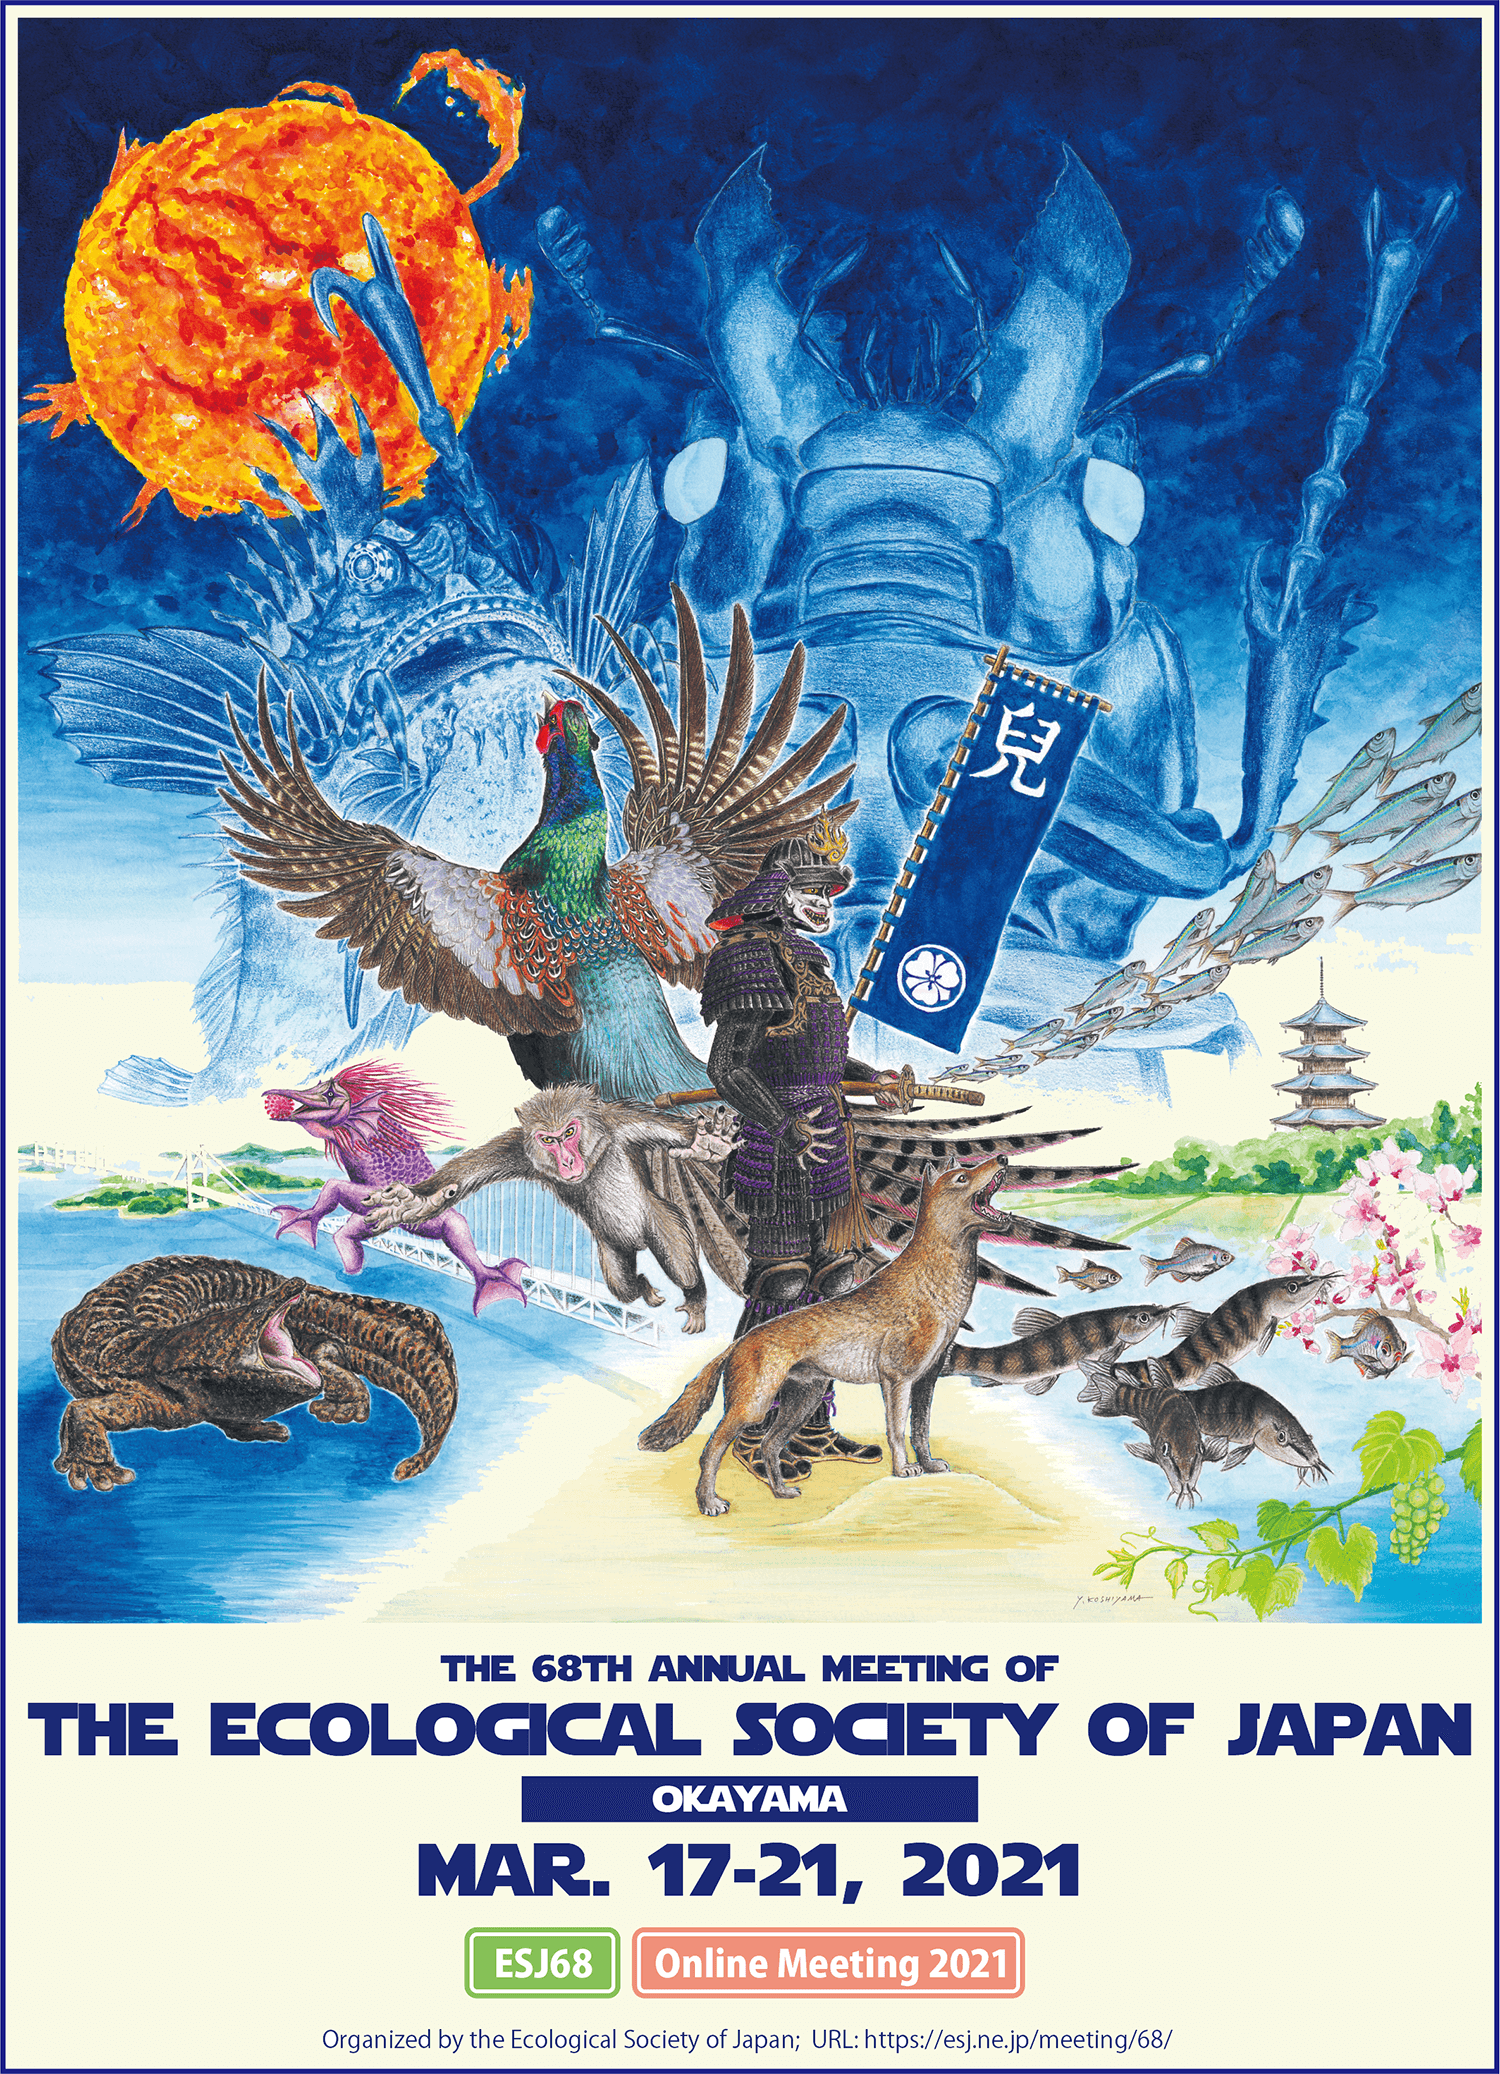 The 68th Annual Meeting of the Ecological Society of Japan